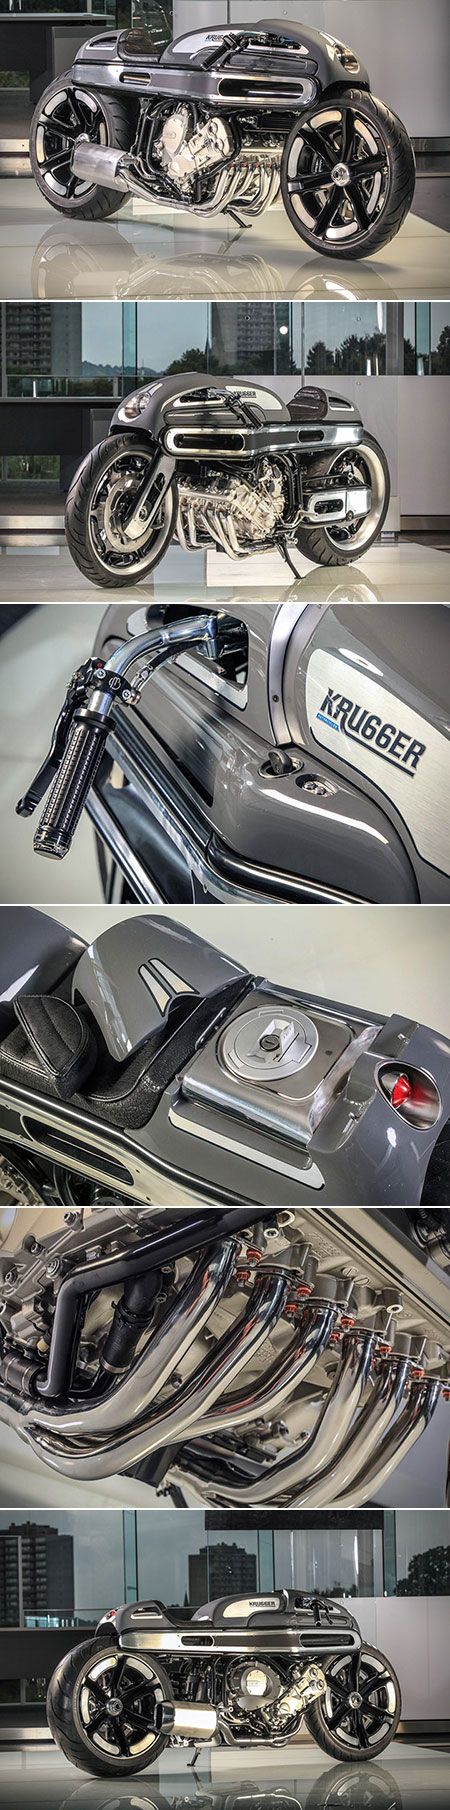 If Robocop Owned a BMW Motorcycle, It Would Be Krugger's Futuristic K1600